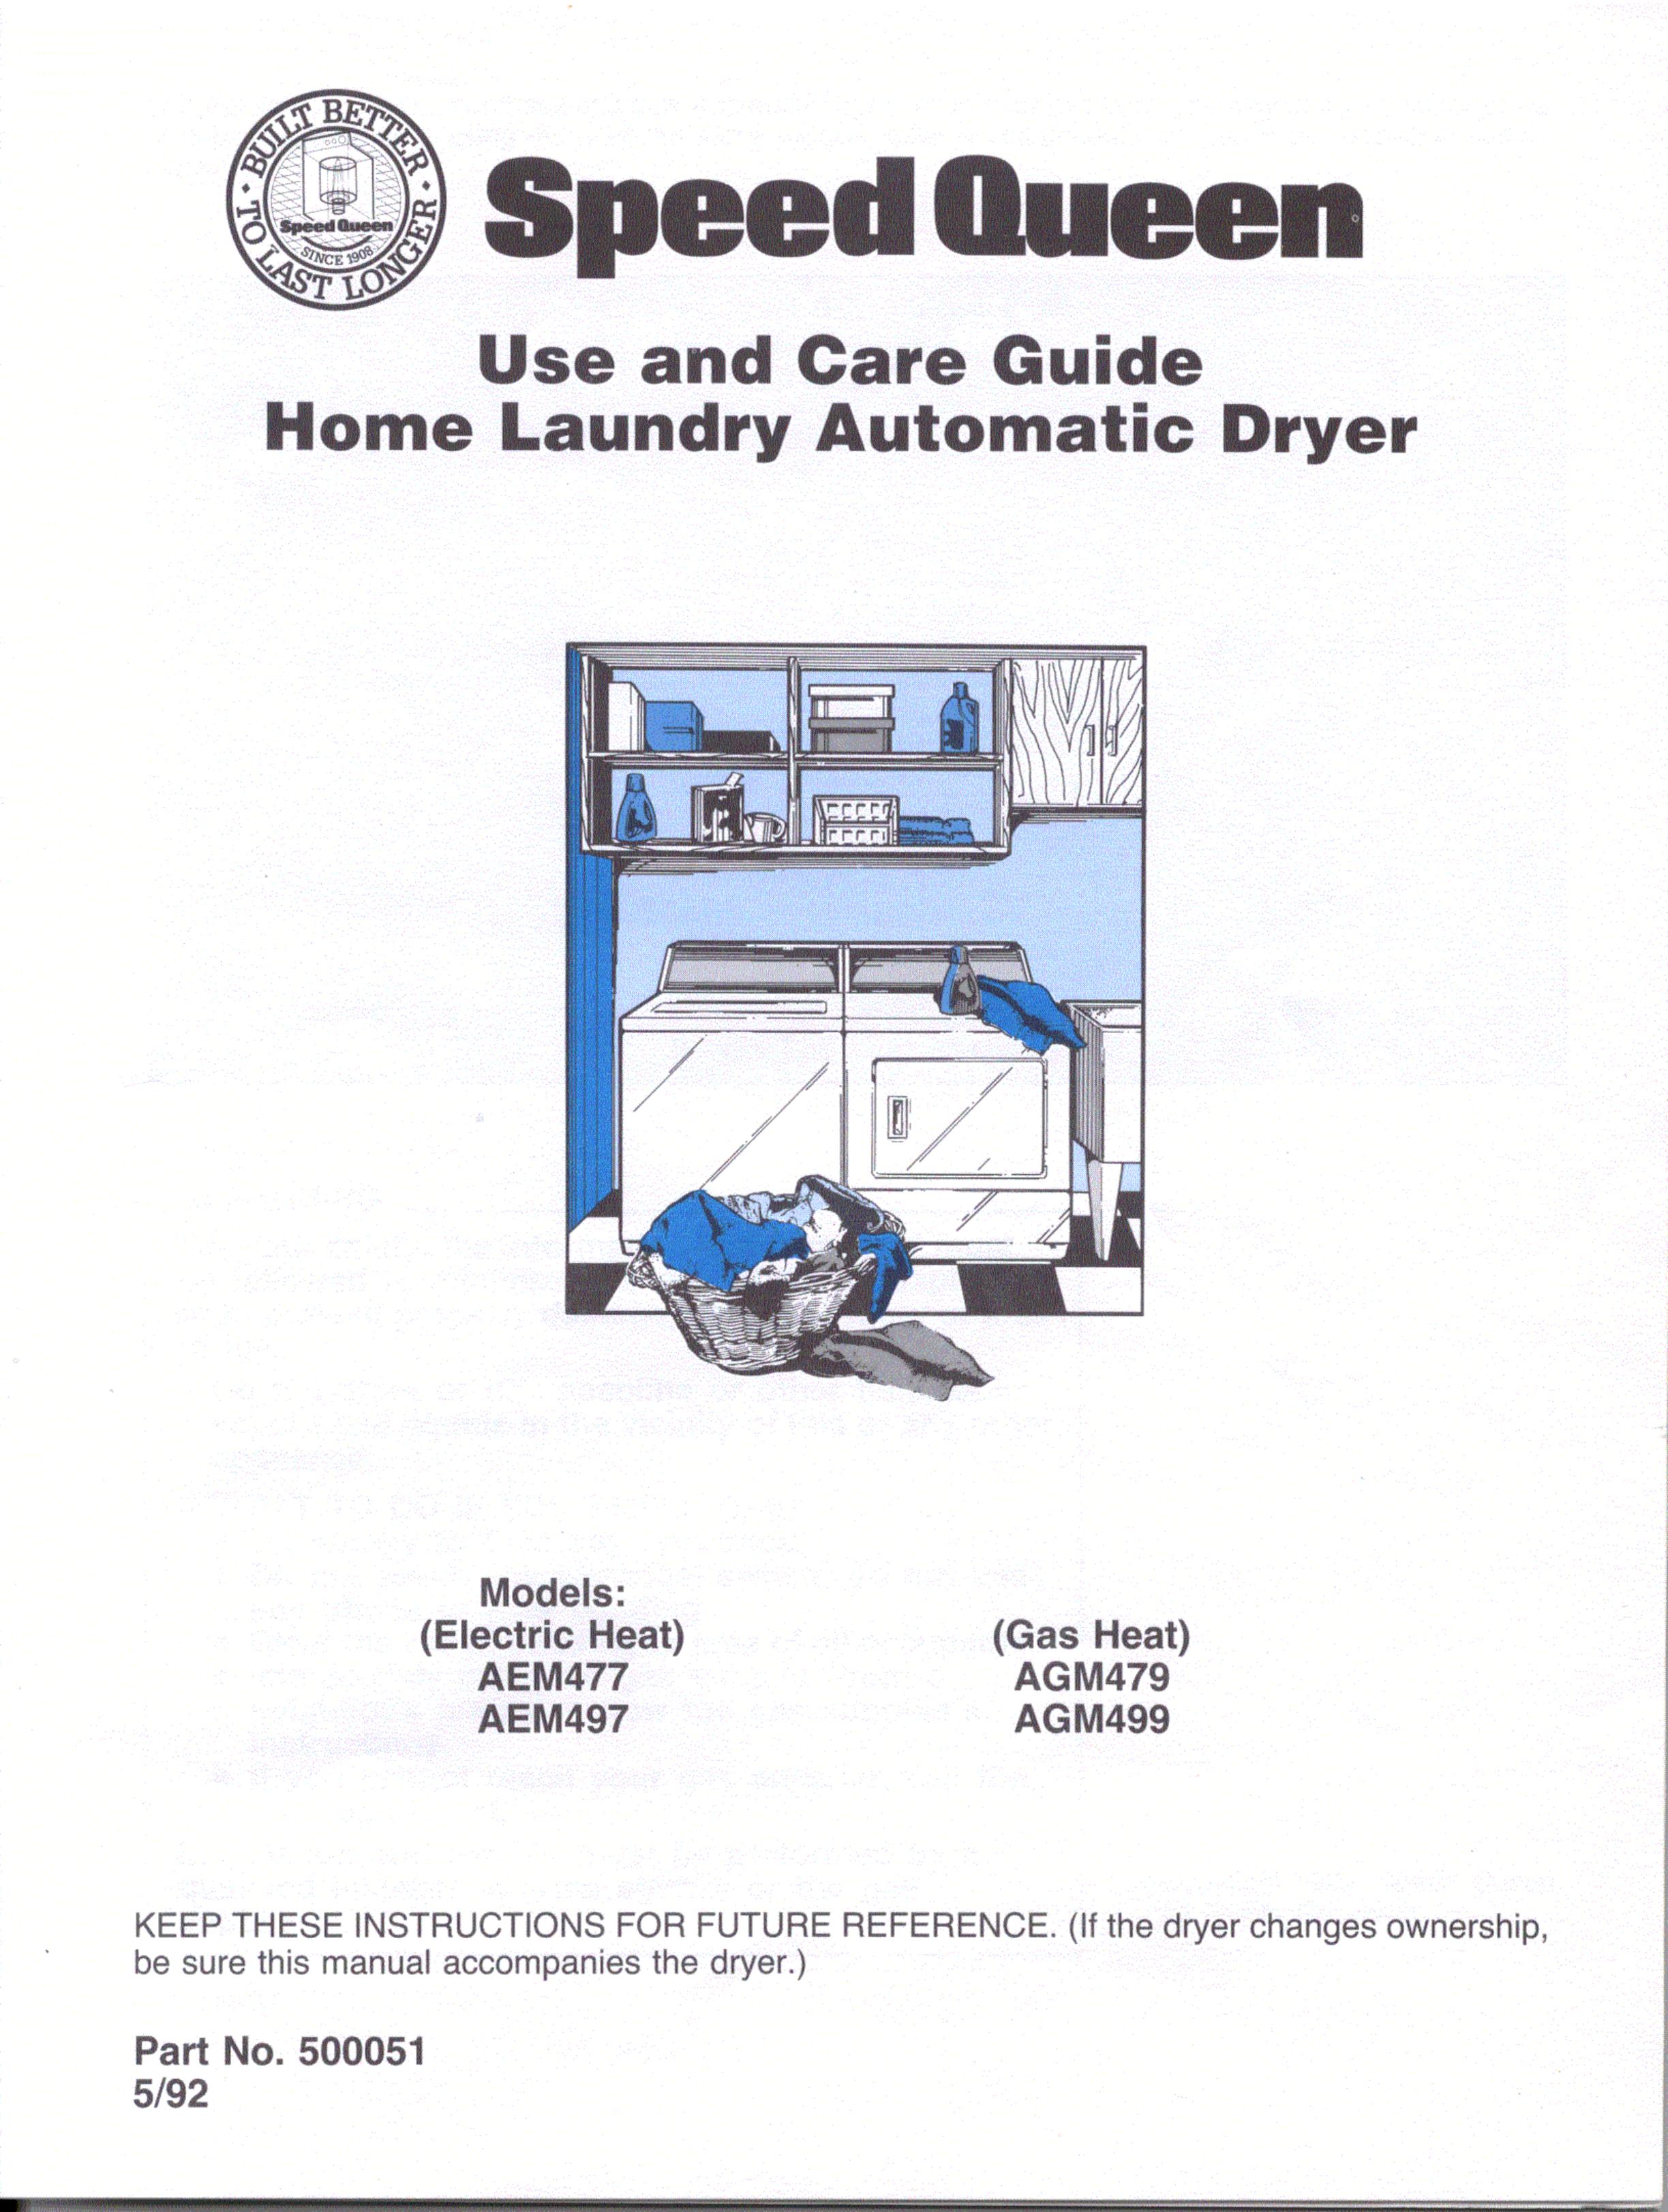 Speed Queen AGM479 Clothes Dryer User Manual